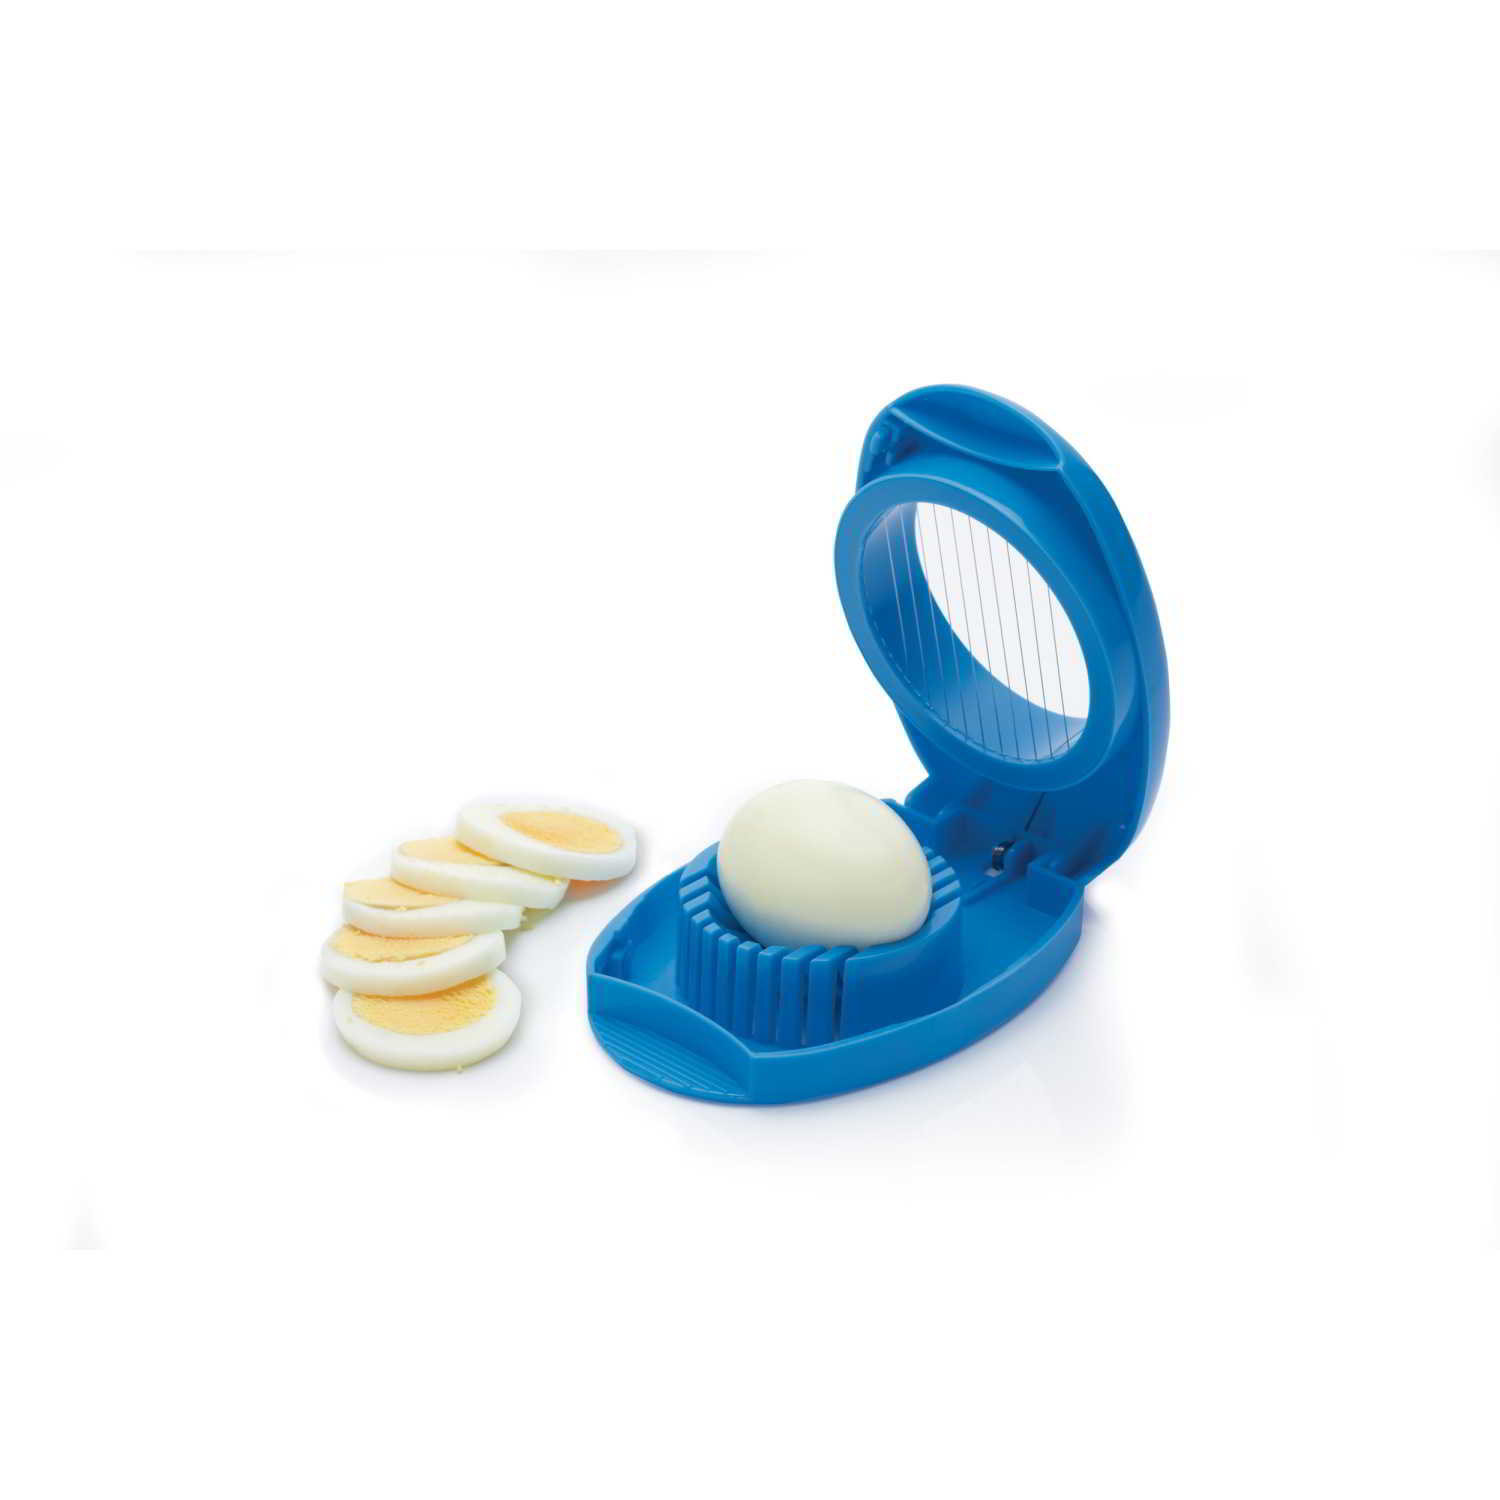 MasterClass Cast Deluxe Egg Slicer and Wedger